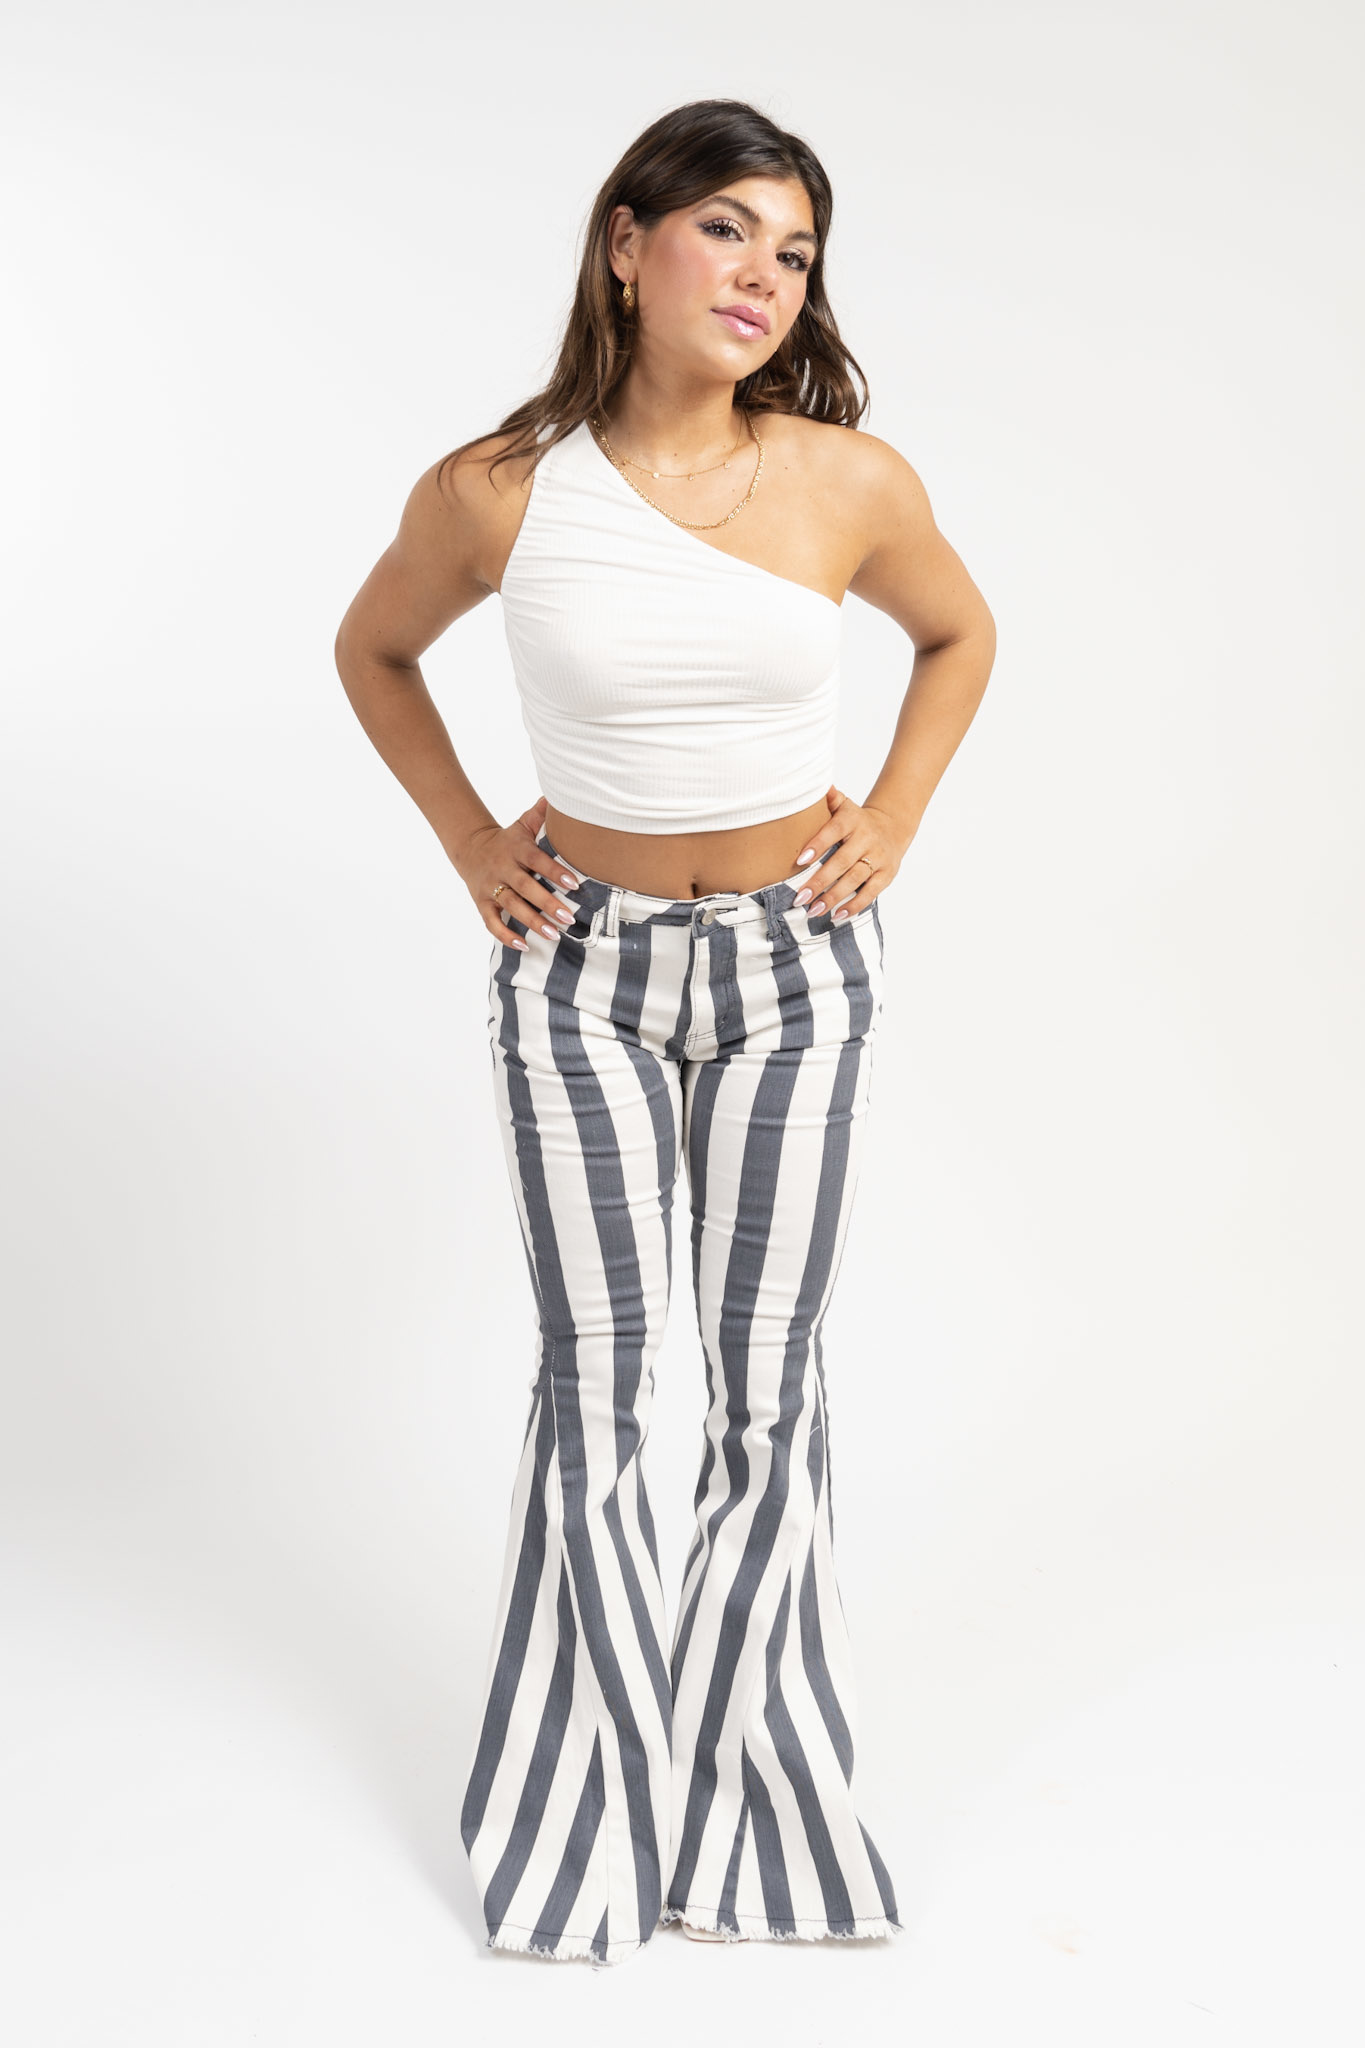 Slay Your Casual Style Like A Pro With These Bell Bottoms